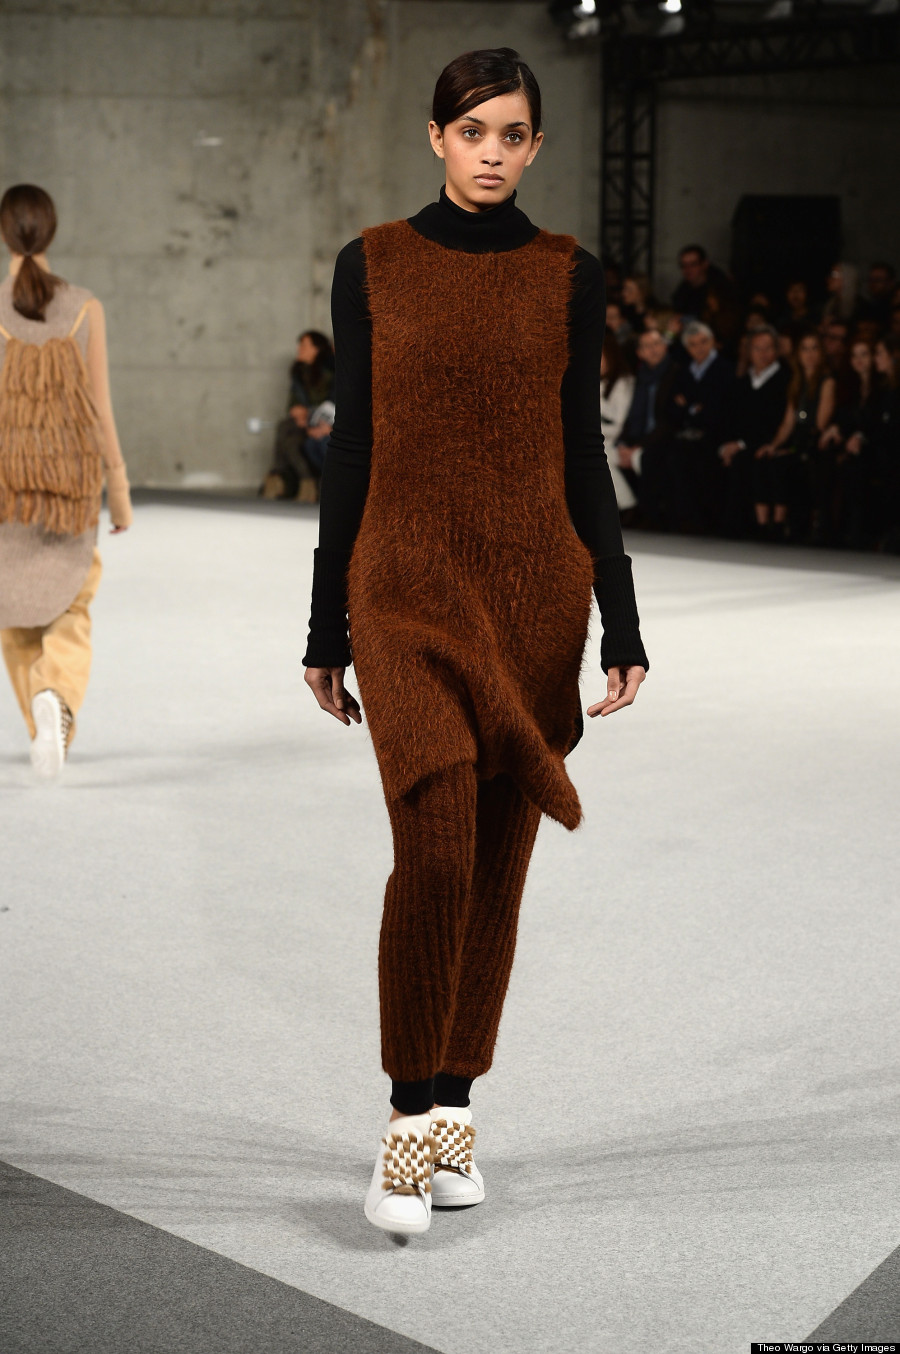 Fall 2014 Fashion Trends: 10 Key Looks You Need Now (PHOTOS) | HuffPost ...